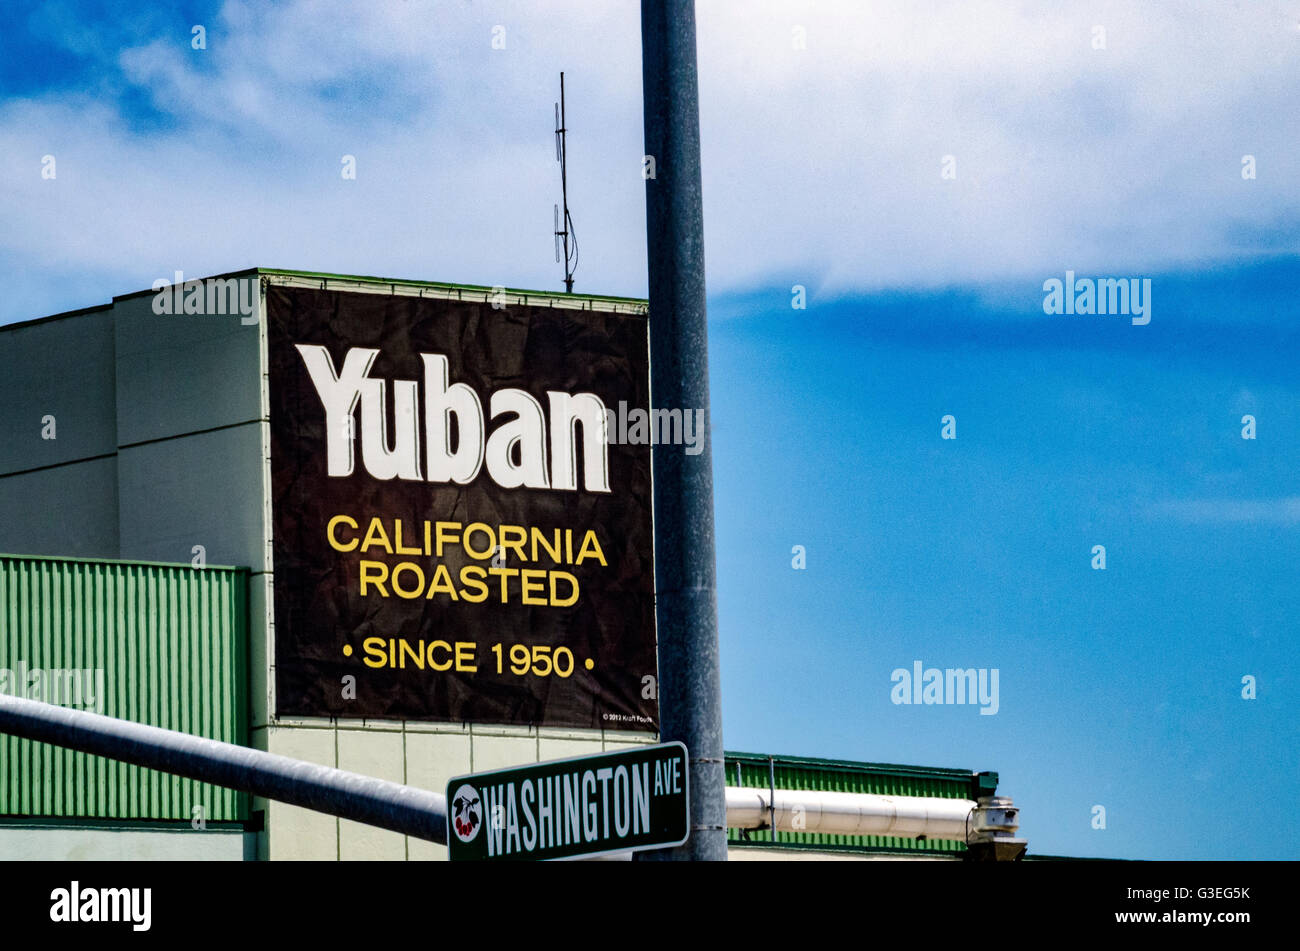 A sign for Yuban Coffee a brand of Maxwell house coffee which is a division of Kraft Heinz company Stock Photo